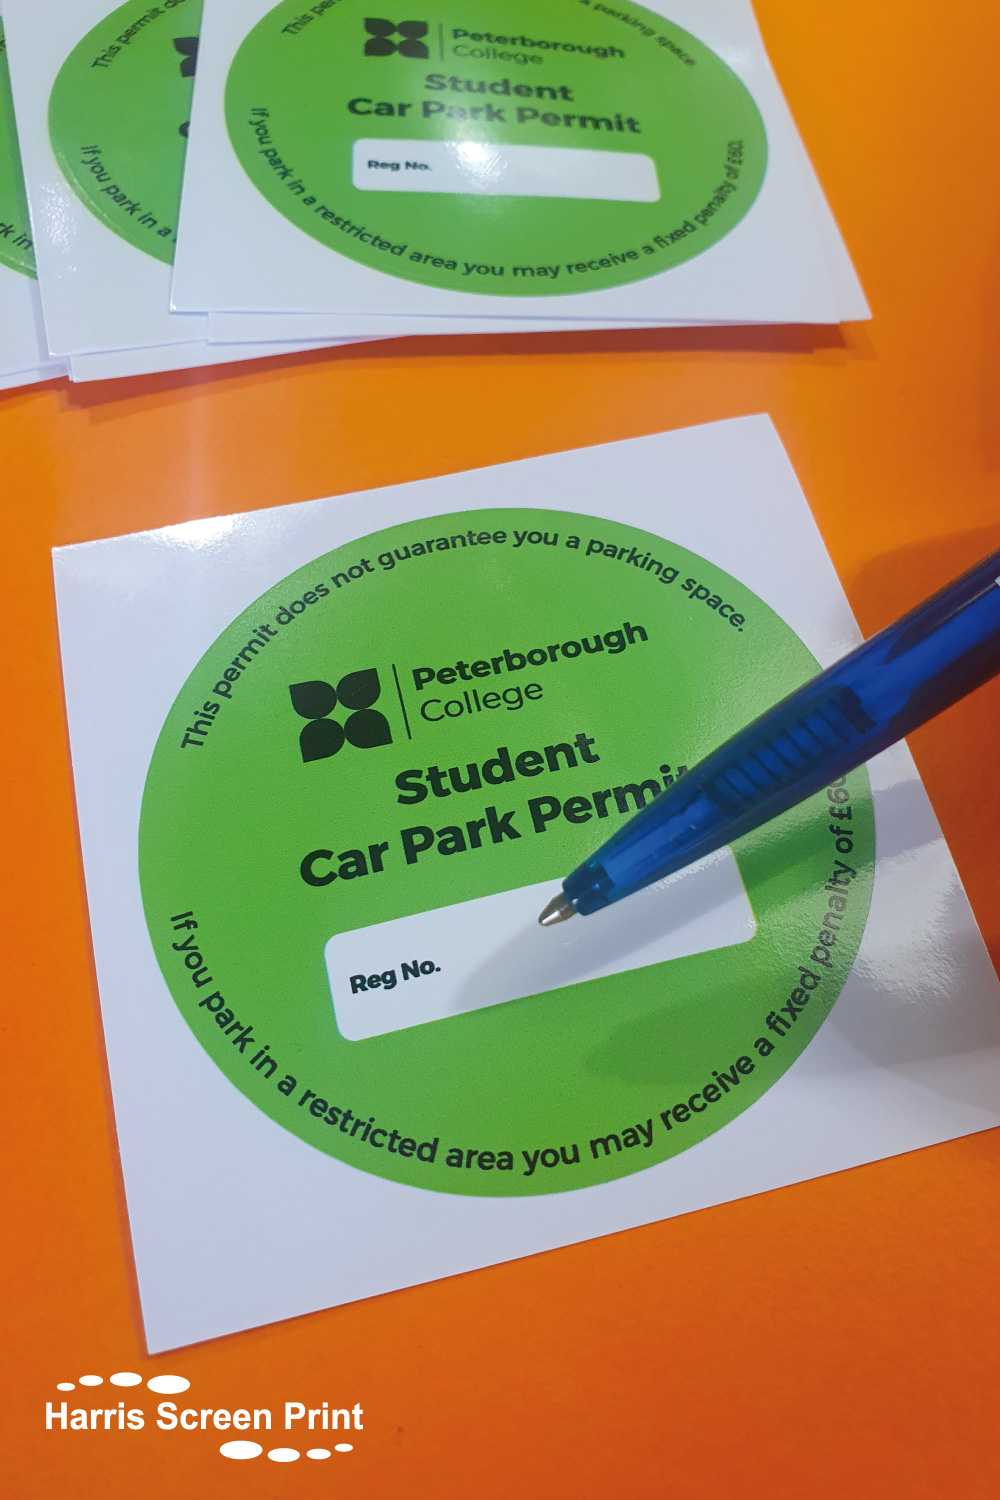 Student parking permits printed for Peterborough College